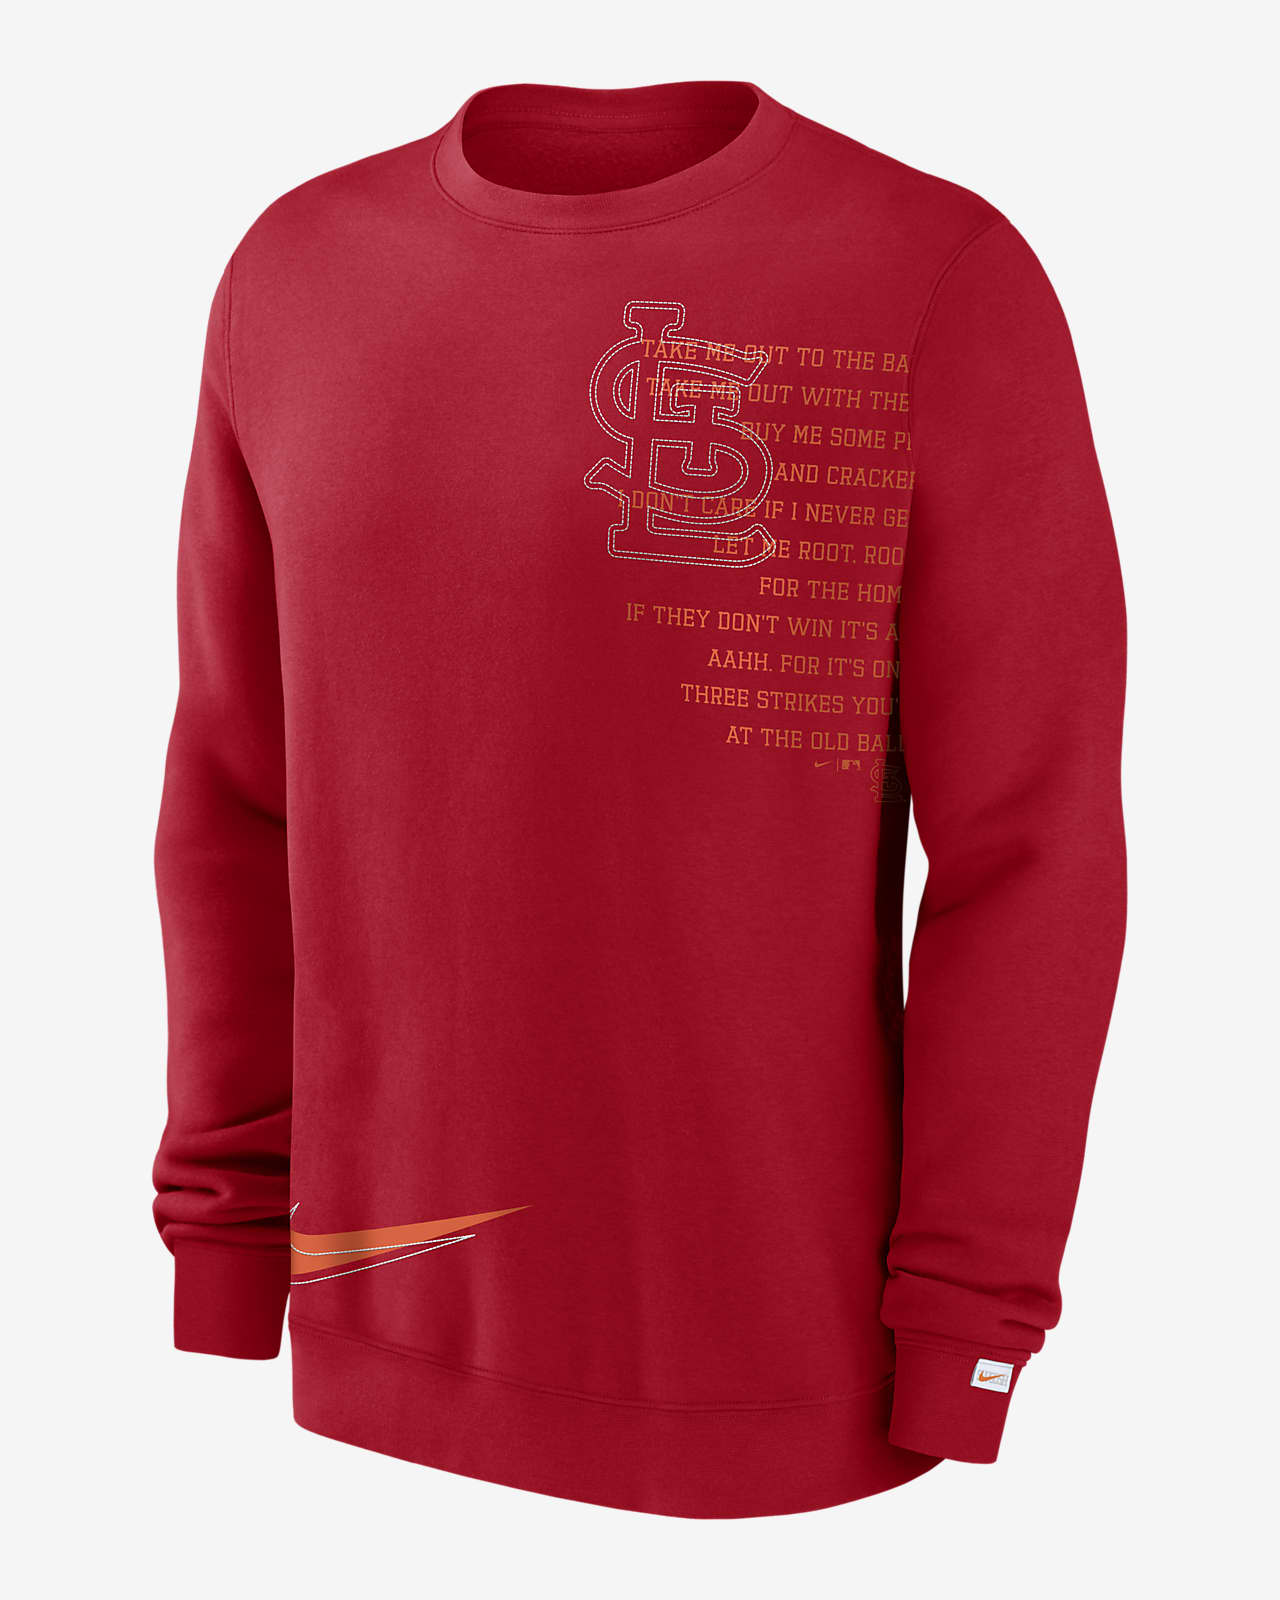 St. Louis Cardinals Red MLB Sweatshirts for sale